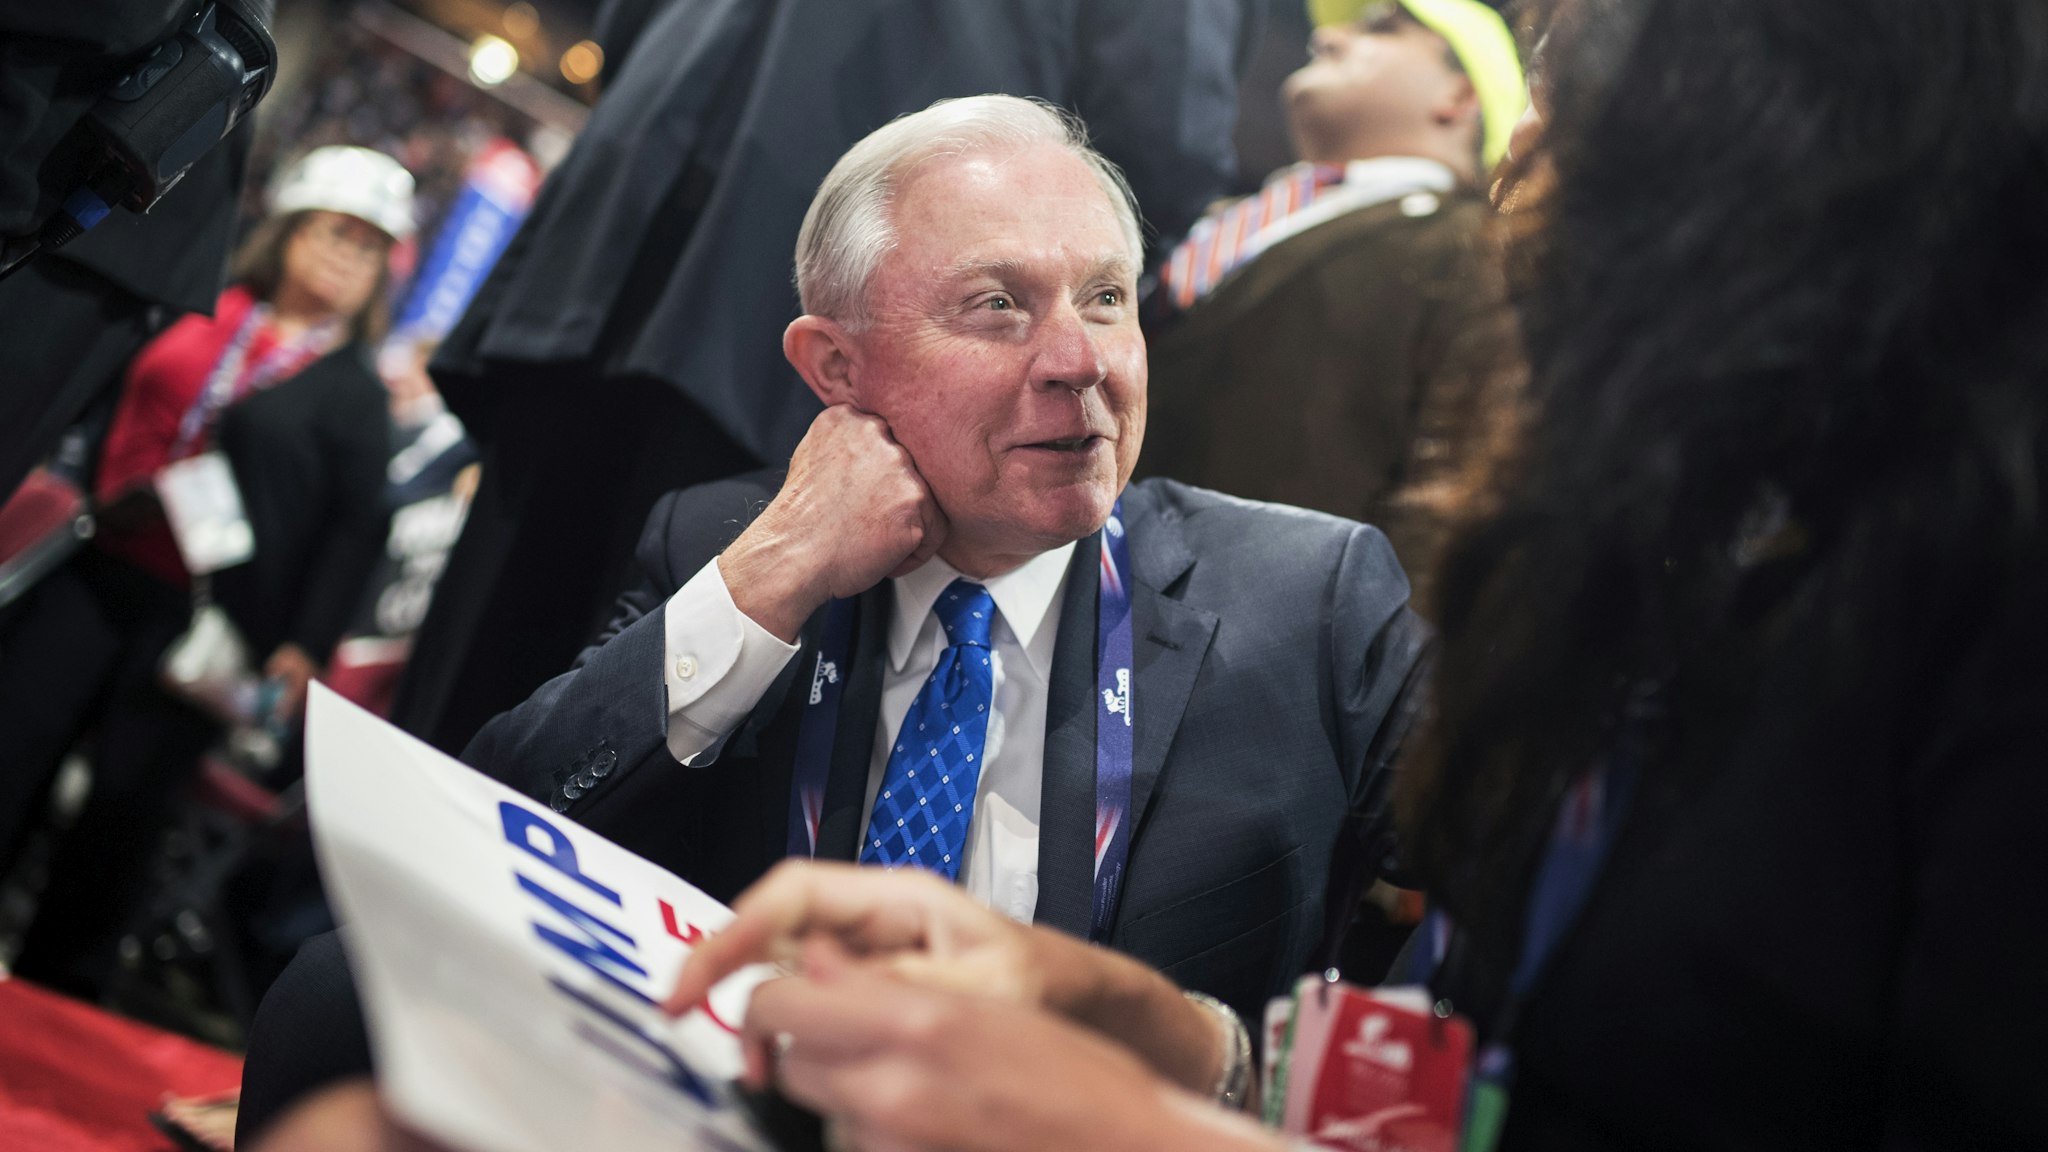 Sen. Jeff Sessions, R-Ala., talks with Alabama delegates on the floor of the Quicken Loans Arena at the Republican National Convention in Cleveland, Ohio, July 20, 2016.